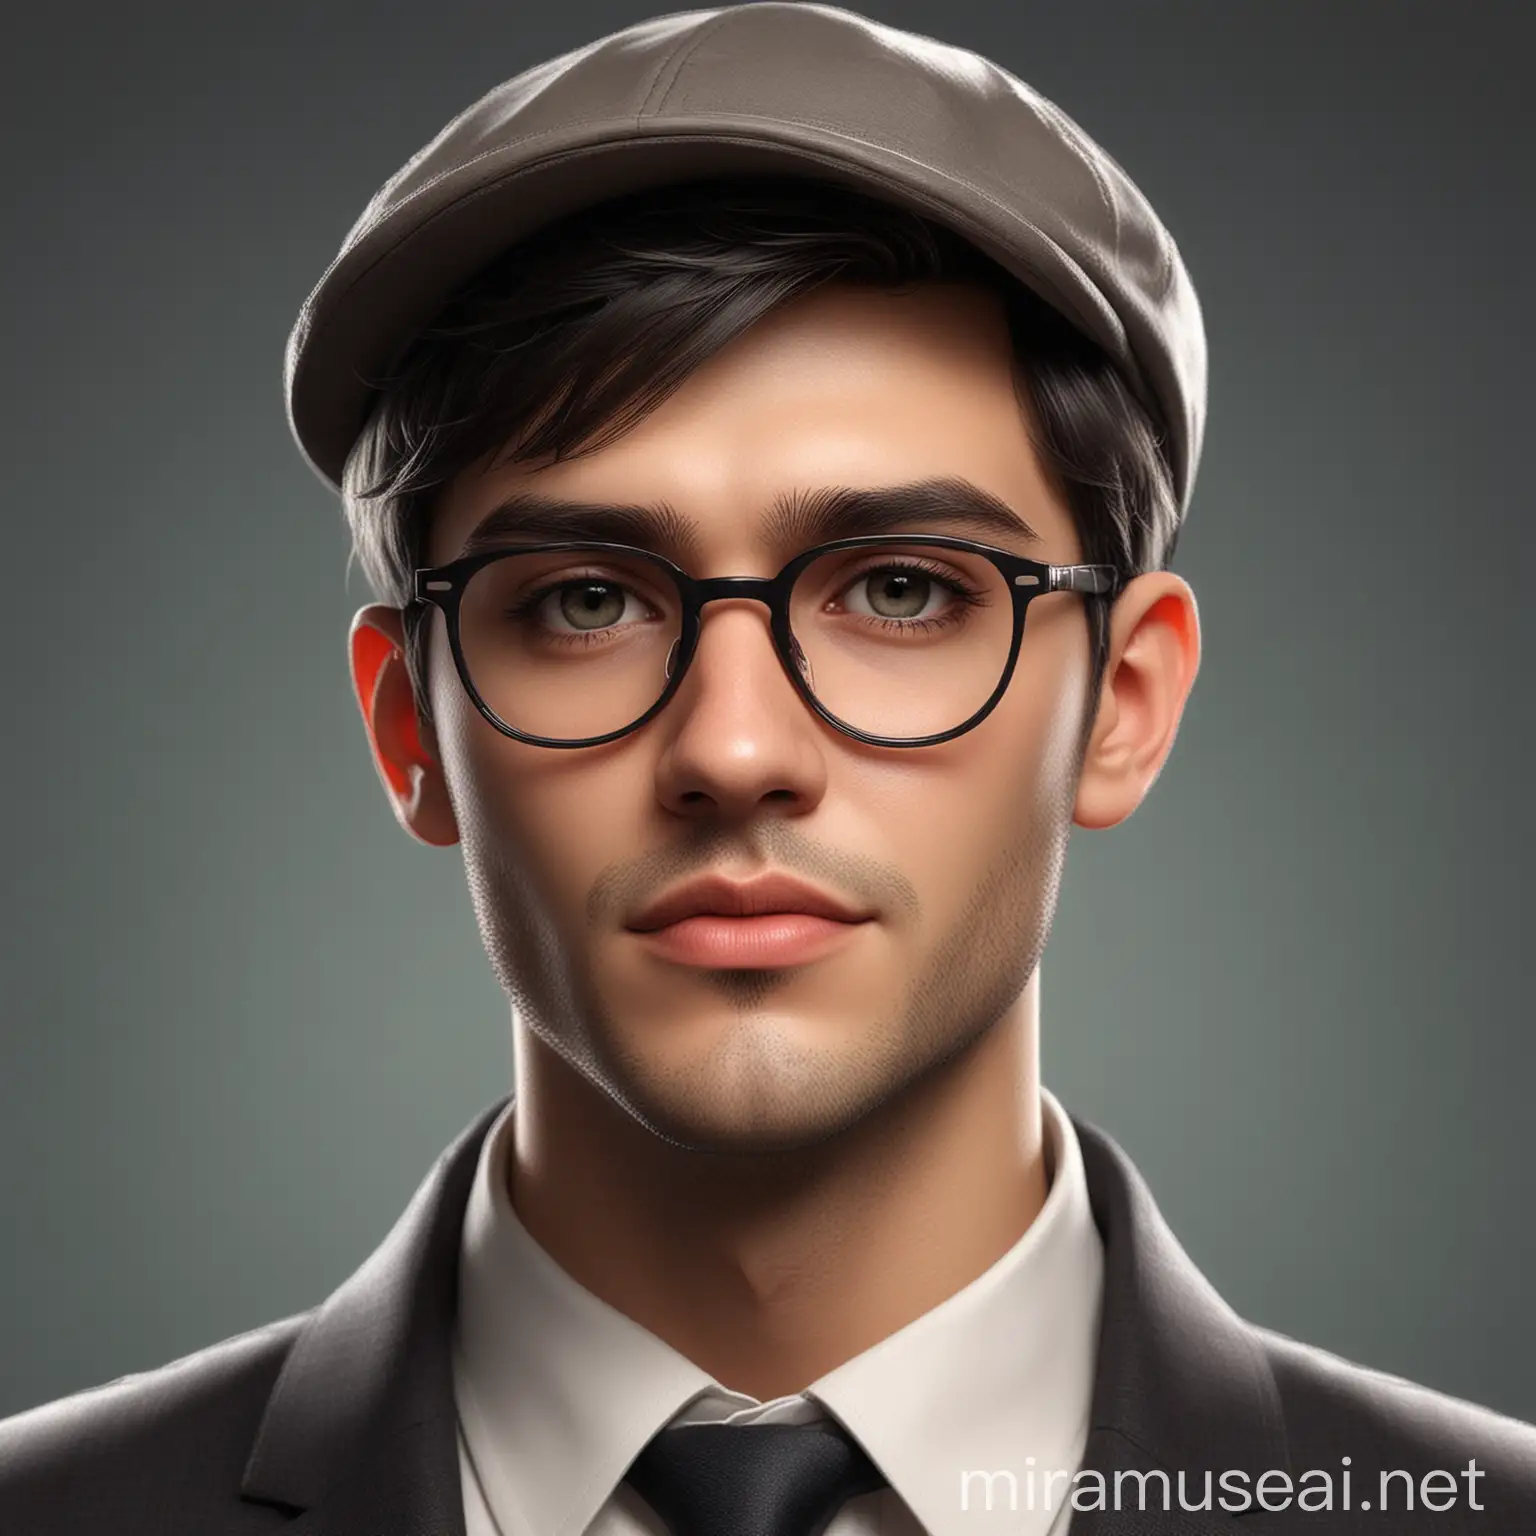 Design a 2D male character wearing stylish eyeglasses and a sleek face cap. The character should exude confidence and intelligence, with a hint of mystery in his expression. The eyeglasses should be modern and sophisticated, complementing the character's overall appearance. The face cap should have a contemporary design, adding a touch of urban flair to the character's style. Consider incorporating subtle details or accessories to enhance the character's personality and make him visually compelling.